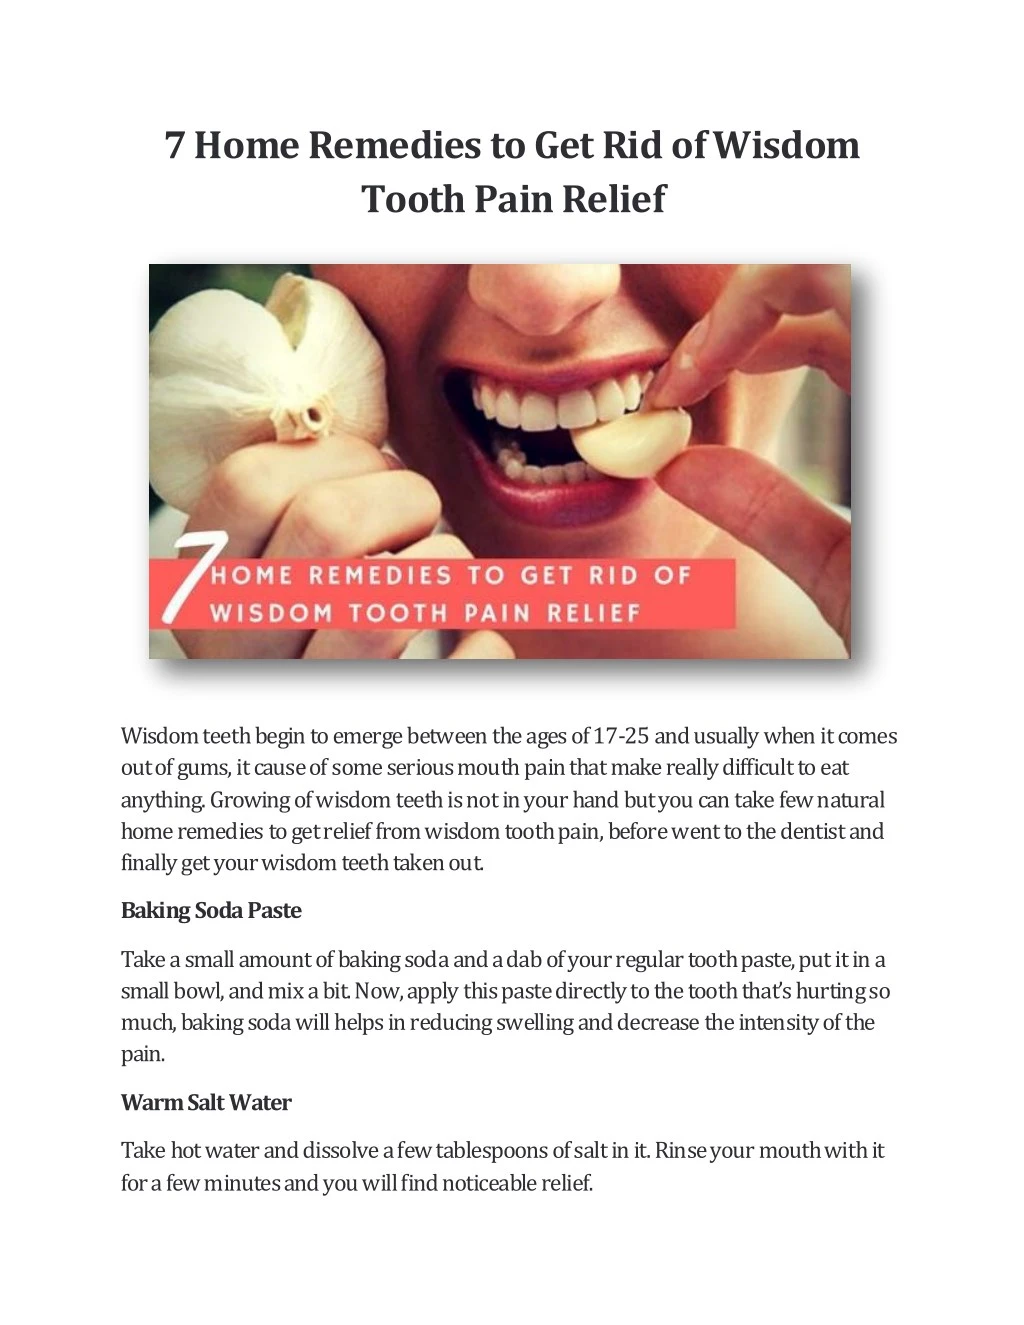 7 home remedies to get rid of wisdom tooth pain